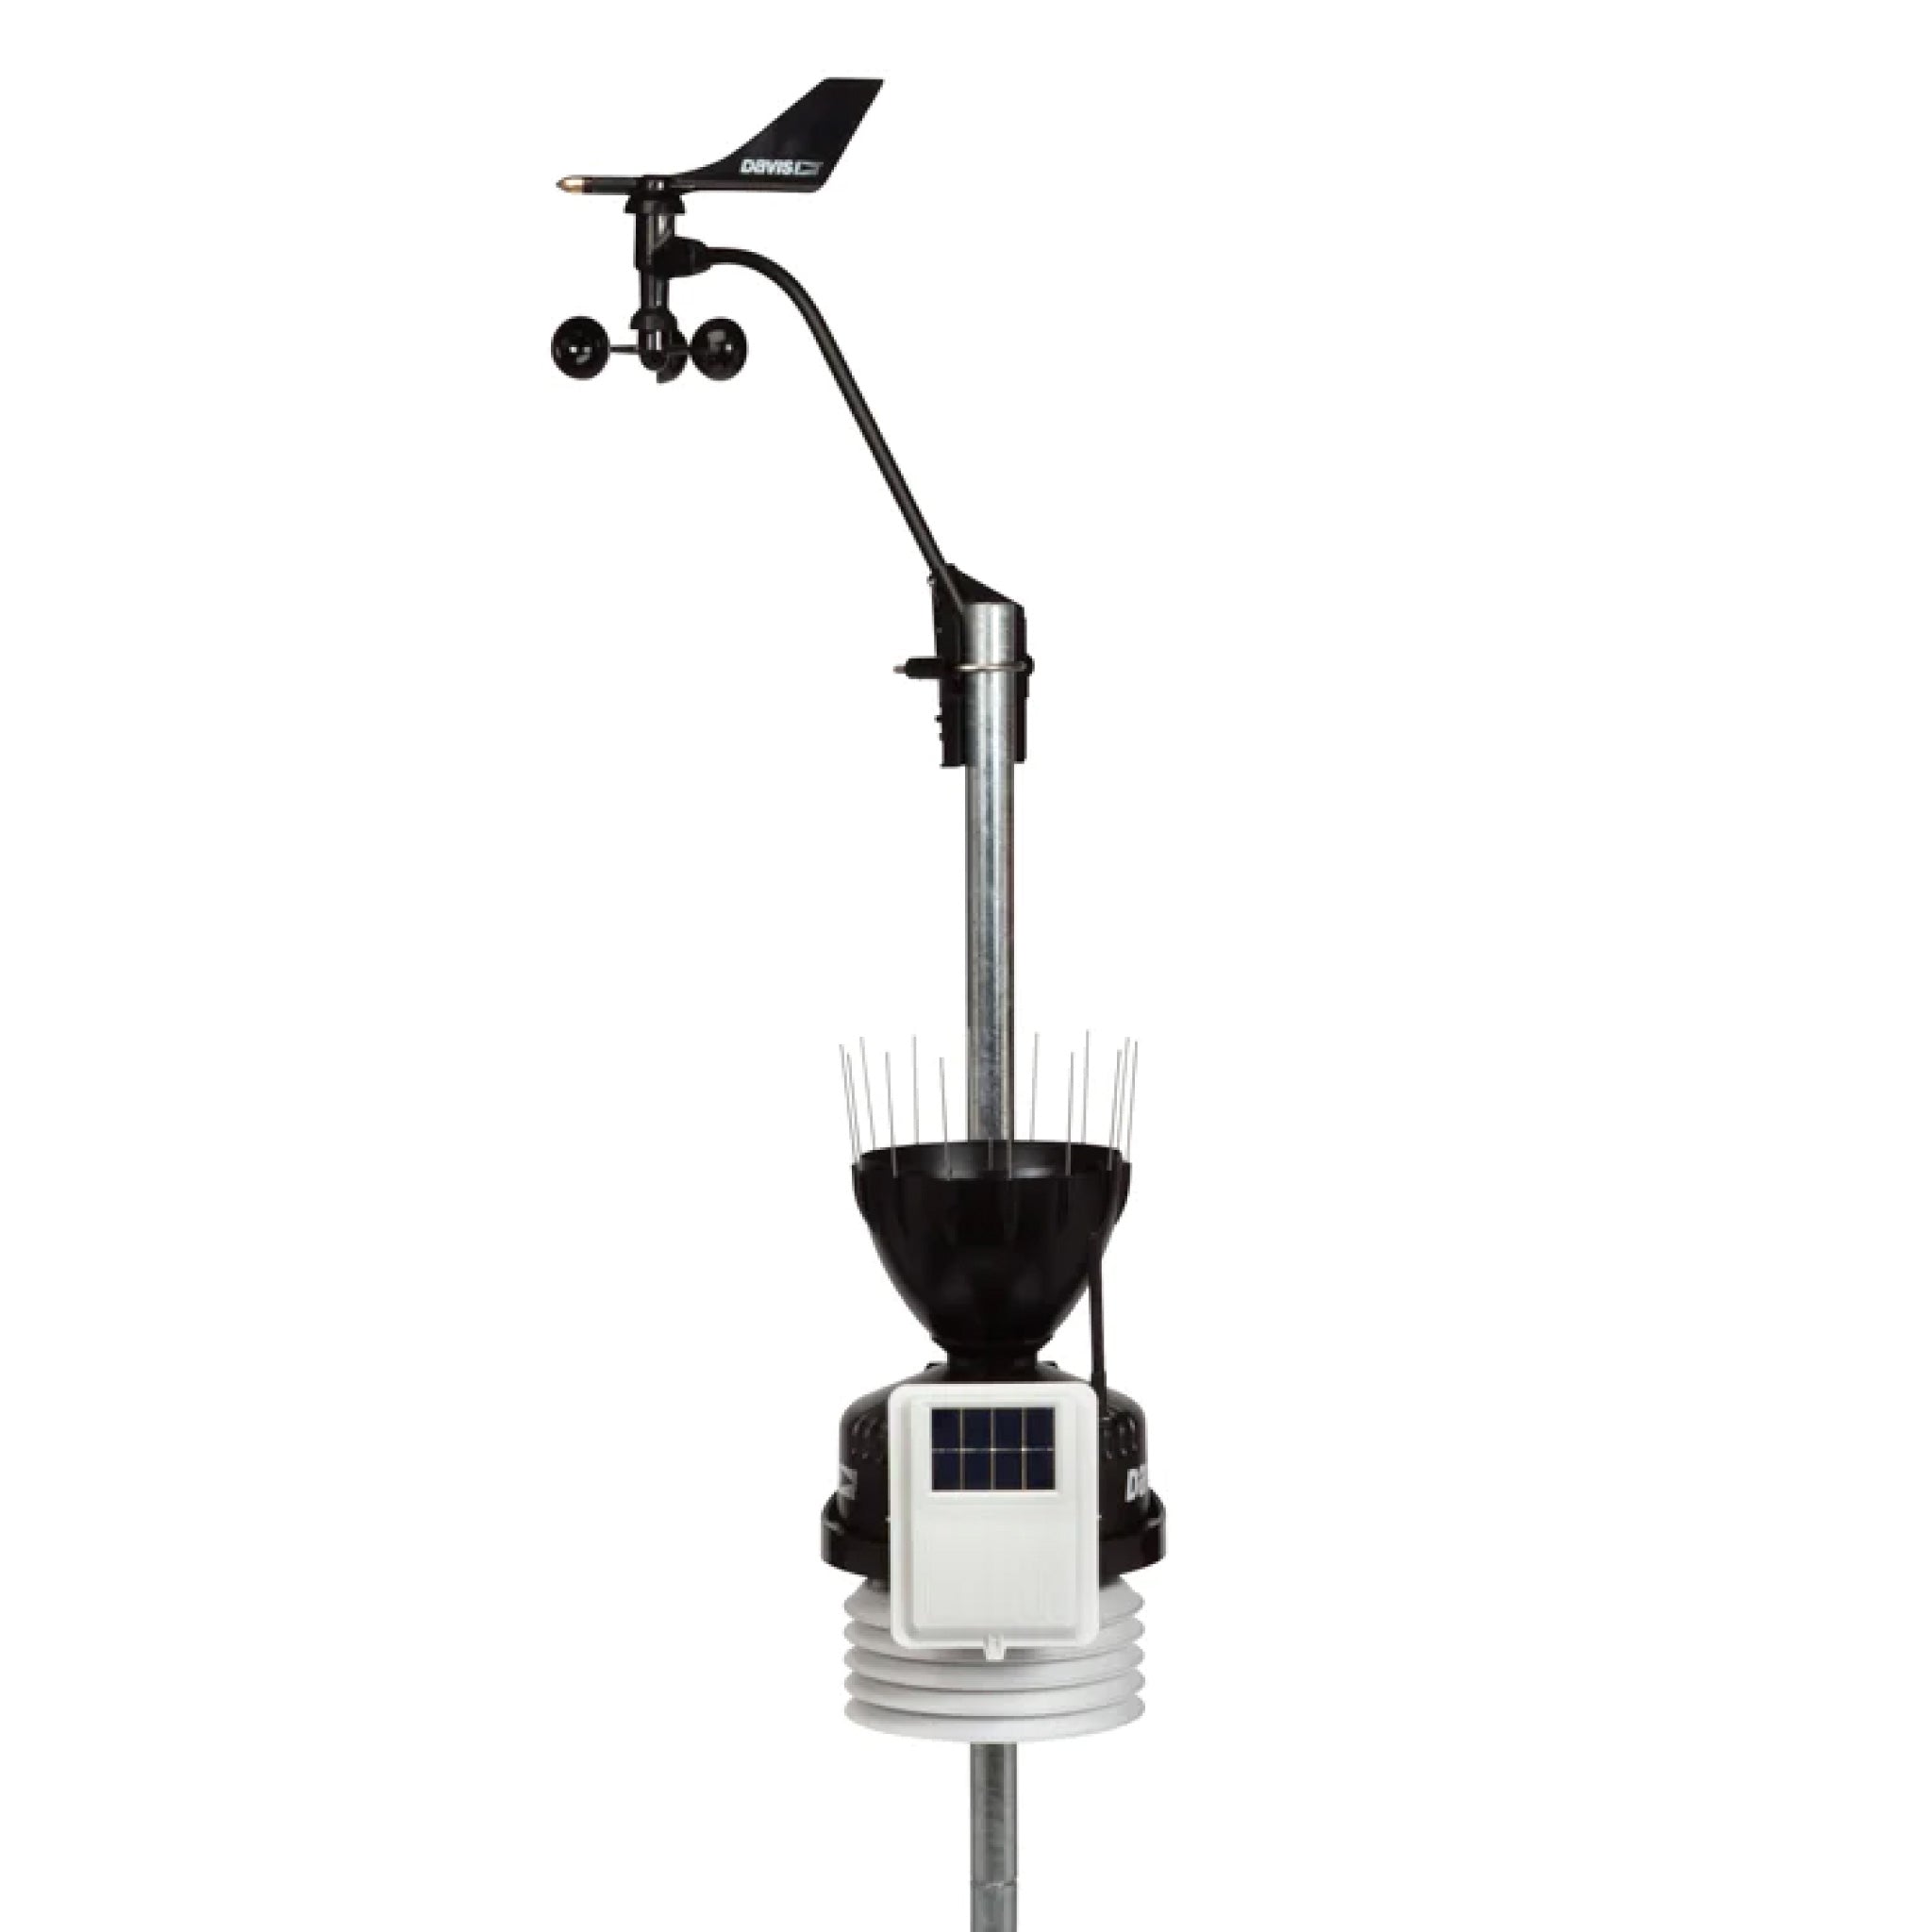 Wireless Vantage Pro2 Weather Station with Standard Radiation Shield and WeatherLink Console - SKU 6252, 6252M